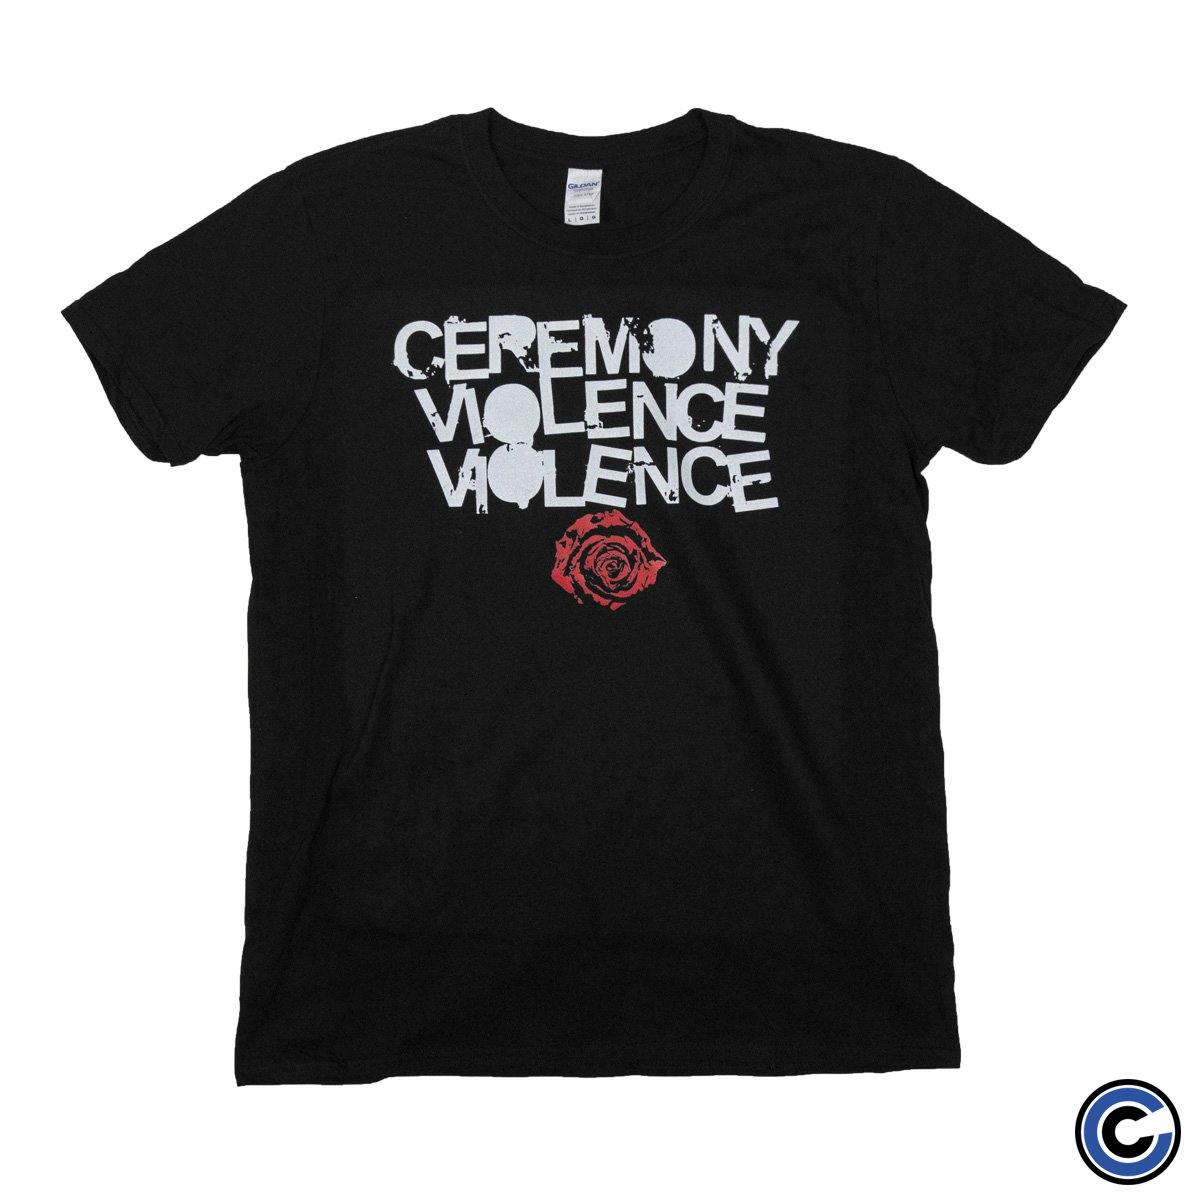 Buy – Ceremony "Violence Violence" Shirt – Band & Music Merch – Cold Cuts Merch